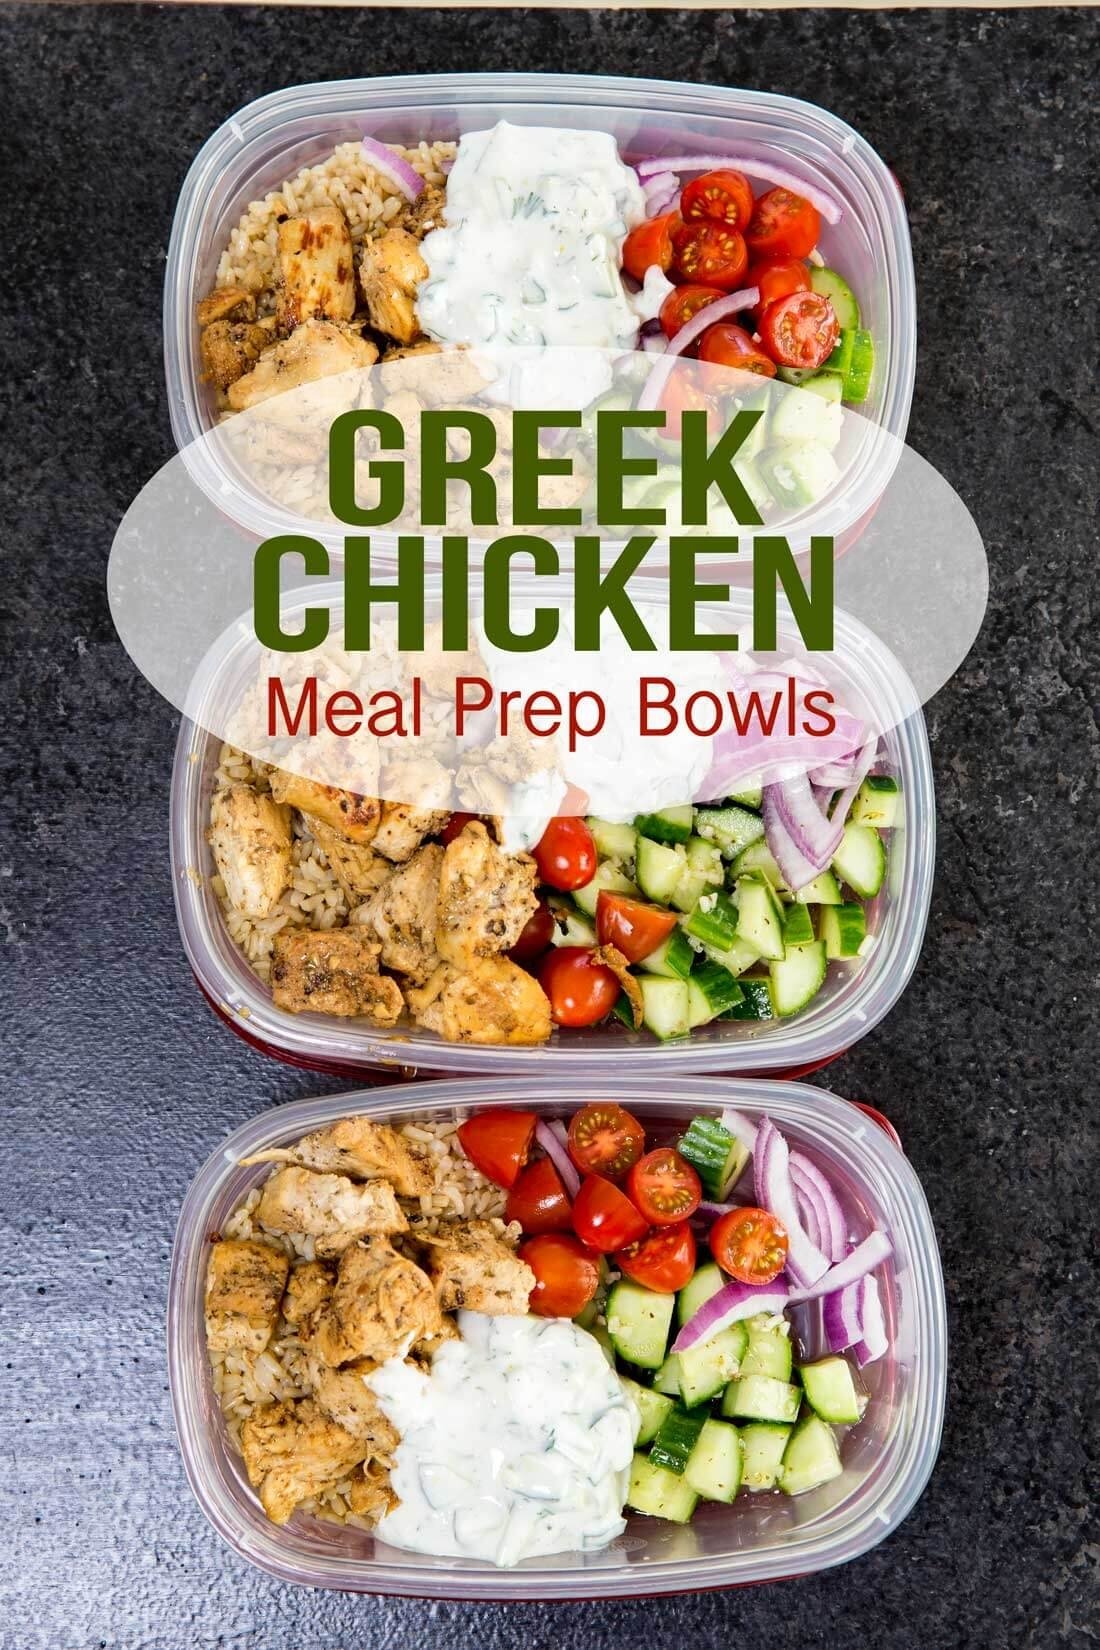 10 Famous Great Lunch Ideas For Work greek chicken bowls meal prep easy easy peasy meals 1 2022